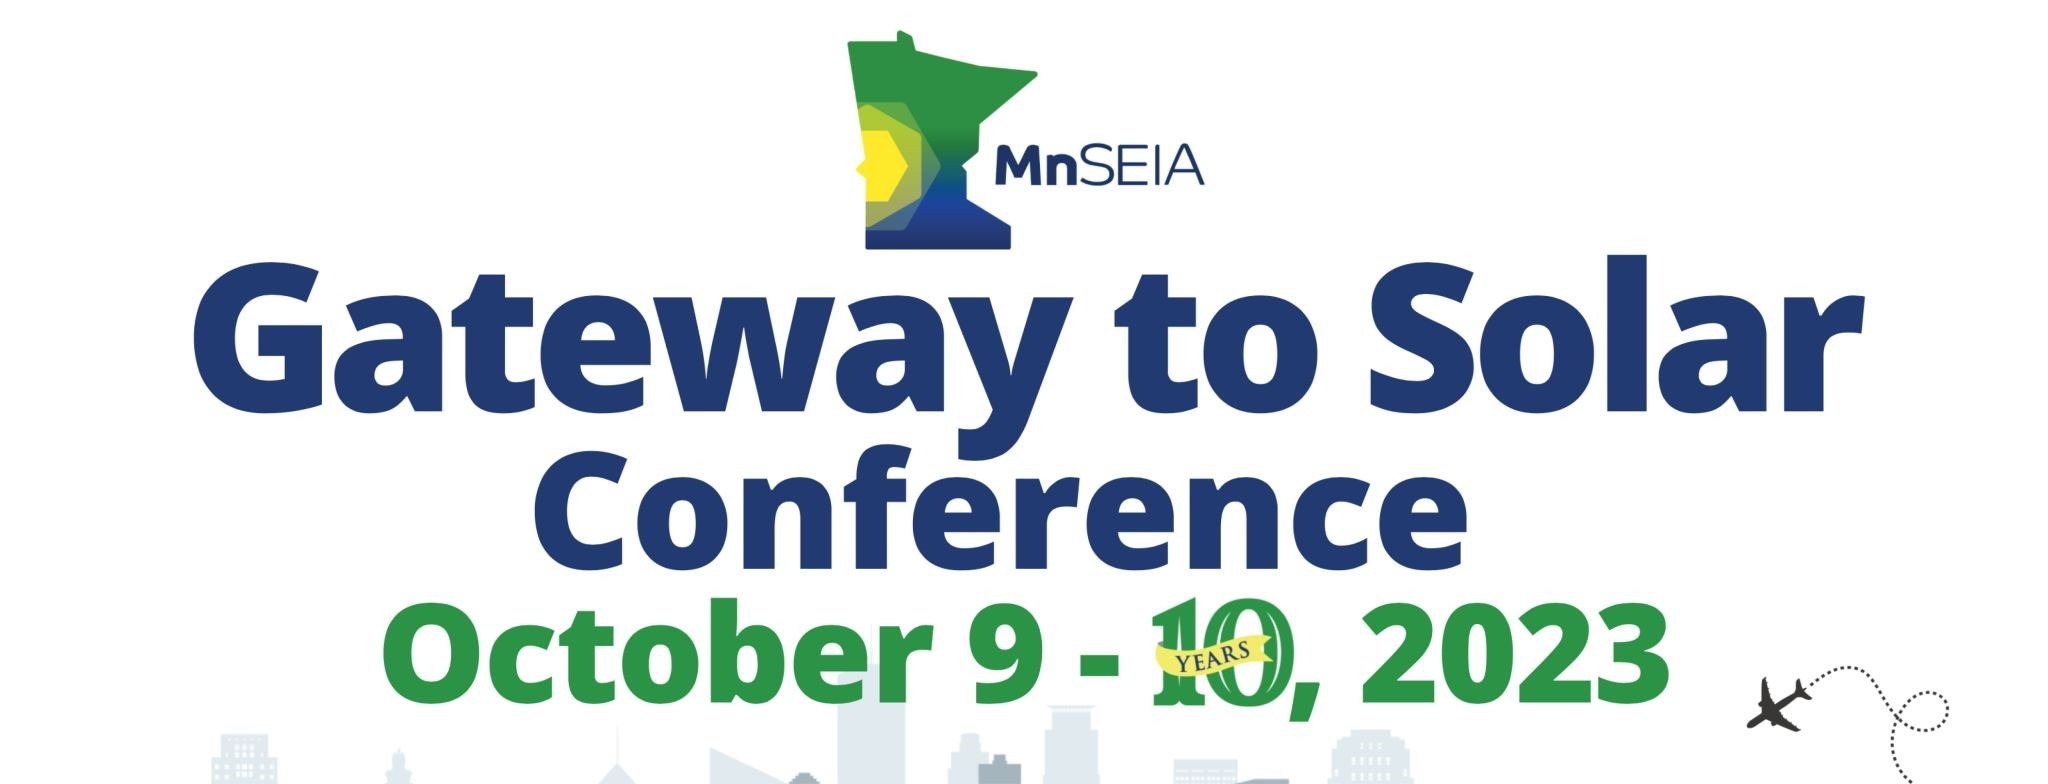 Gateway to Solar Conference Graphic